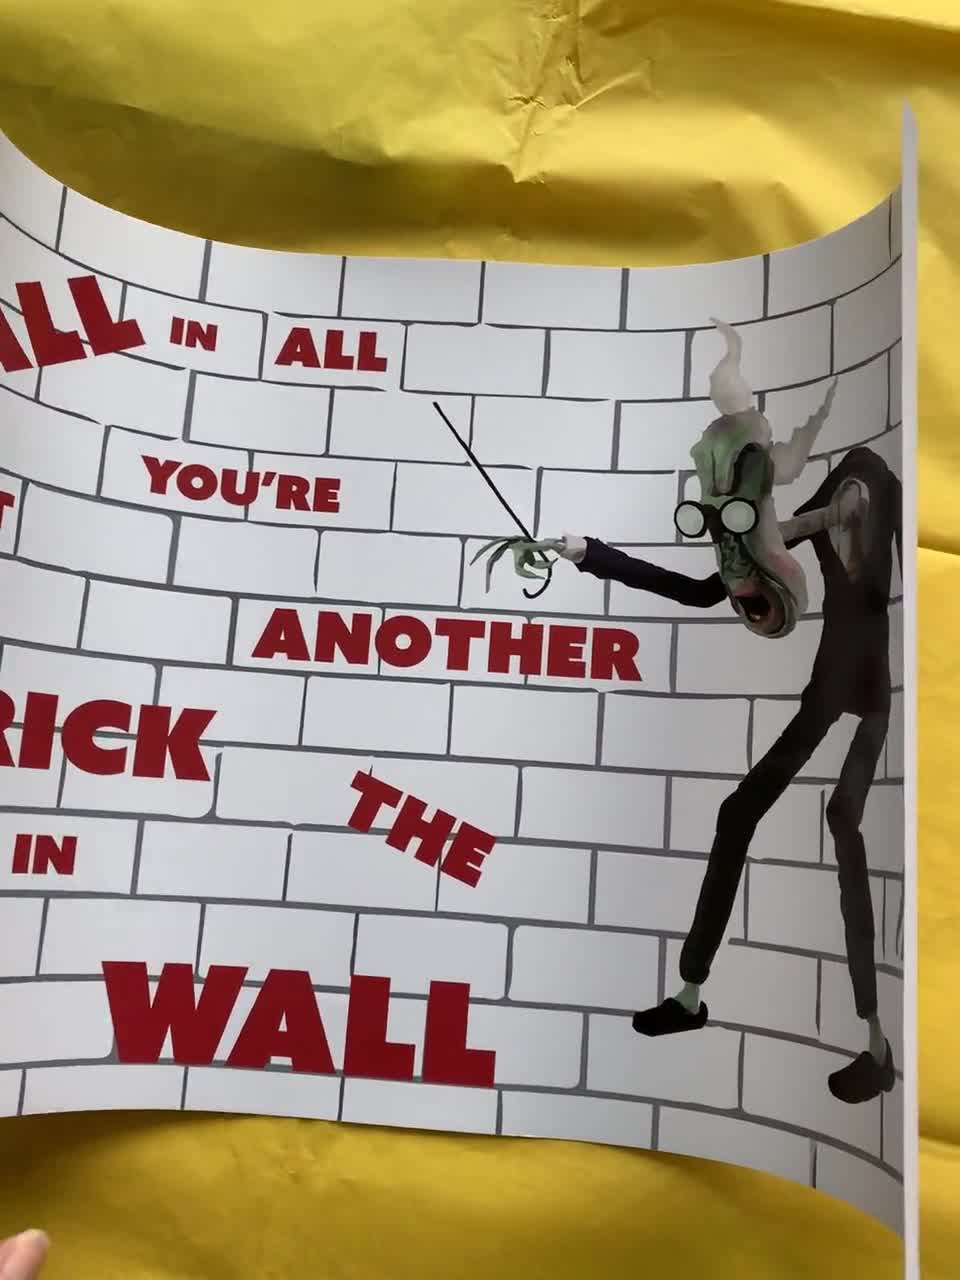 You're Just another Brick in the Wall” : r/pinkfloyd